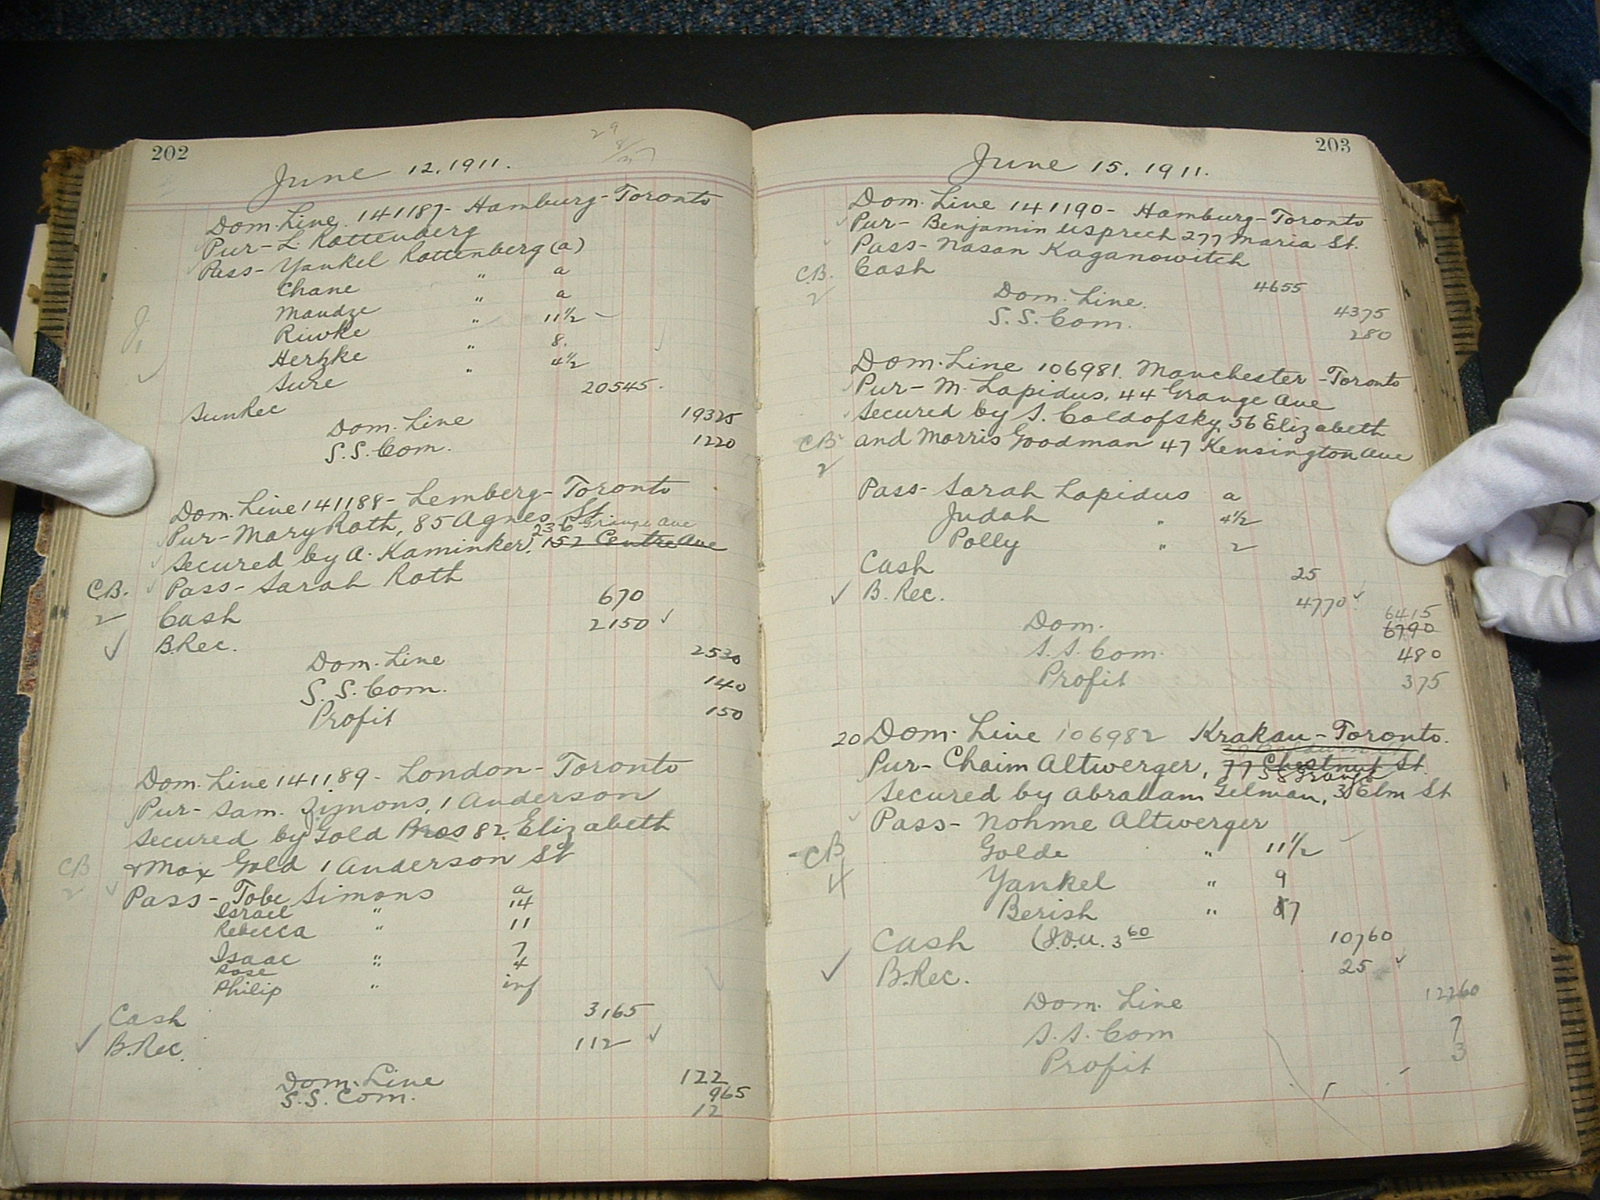 The Rotenberg steamship ledger helps trace the movement of Jewish immigrants to Toronto. On pages 202 and 203 from 1911, there is an entry for a man living at 44 Grange Avenue, who purchased passage to Toronto for his wife and two children. The fare was secured by residents living at 56 Elizabeth Street (in the Ward) and 47 Kensington Avenue. Photograph by Harvey and Adena Glasner.

OJA, MG 1. 
